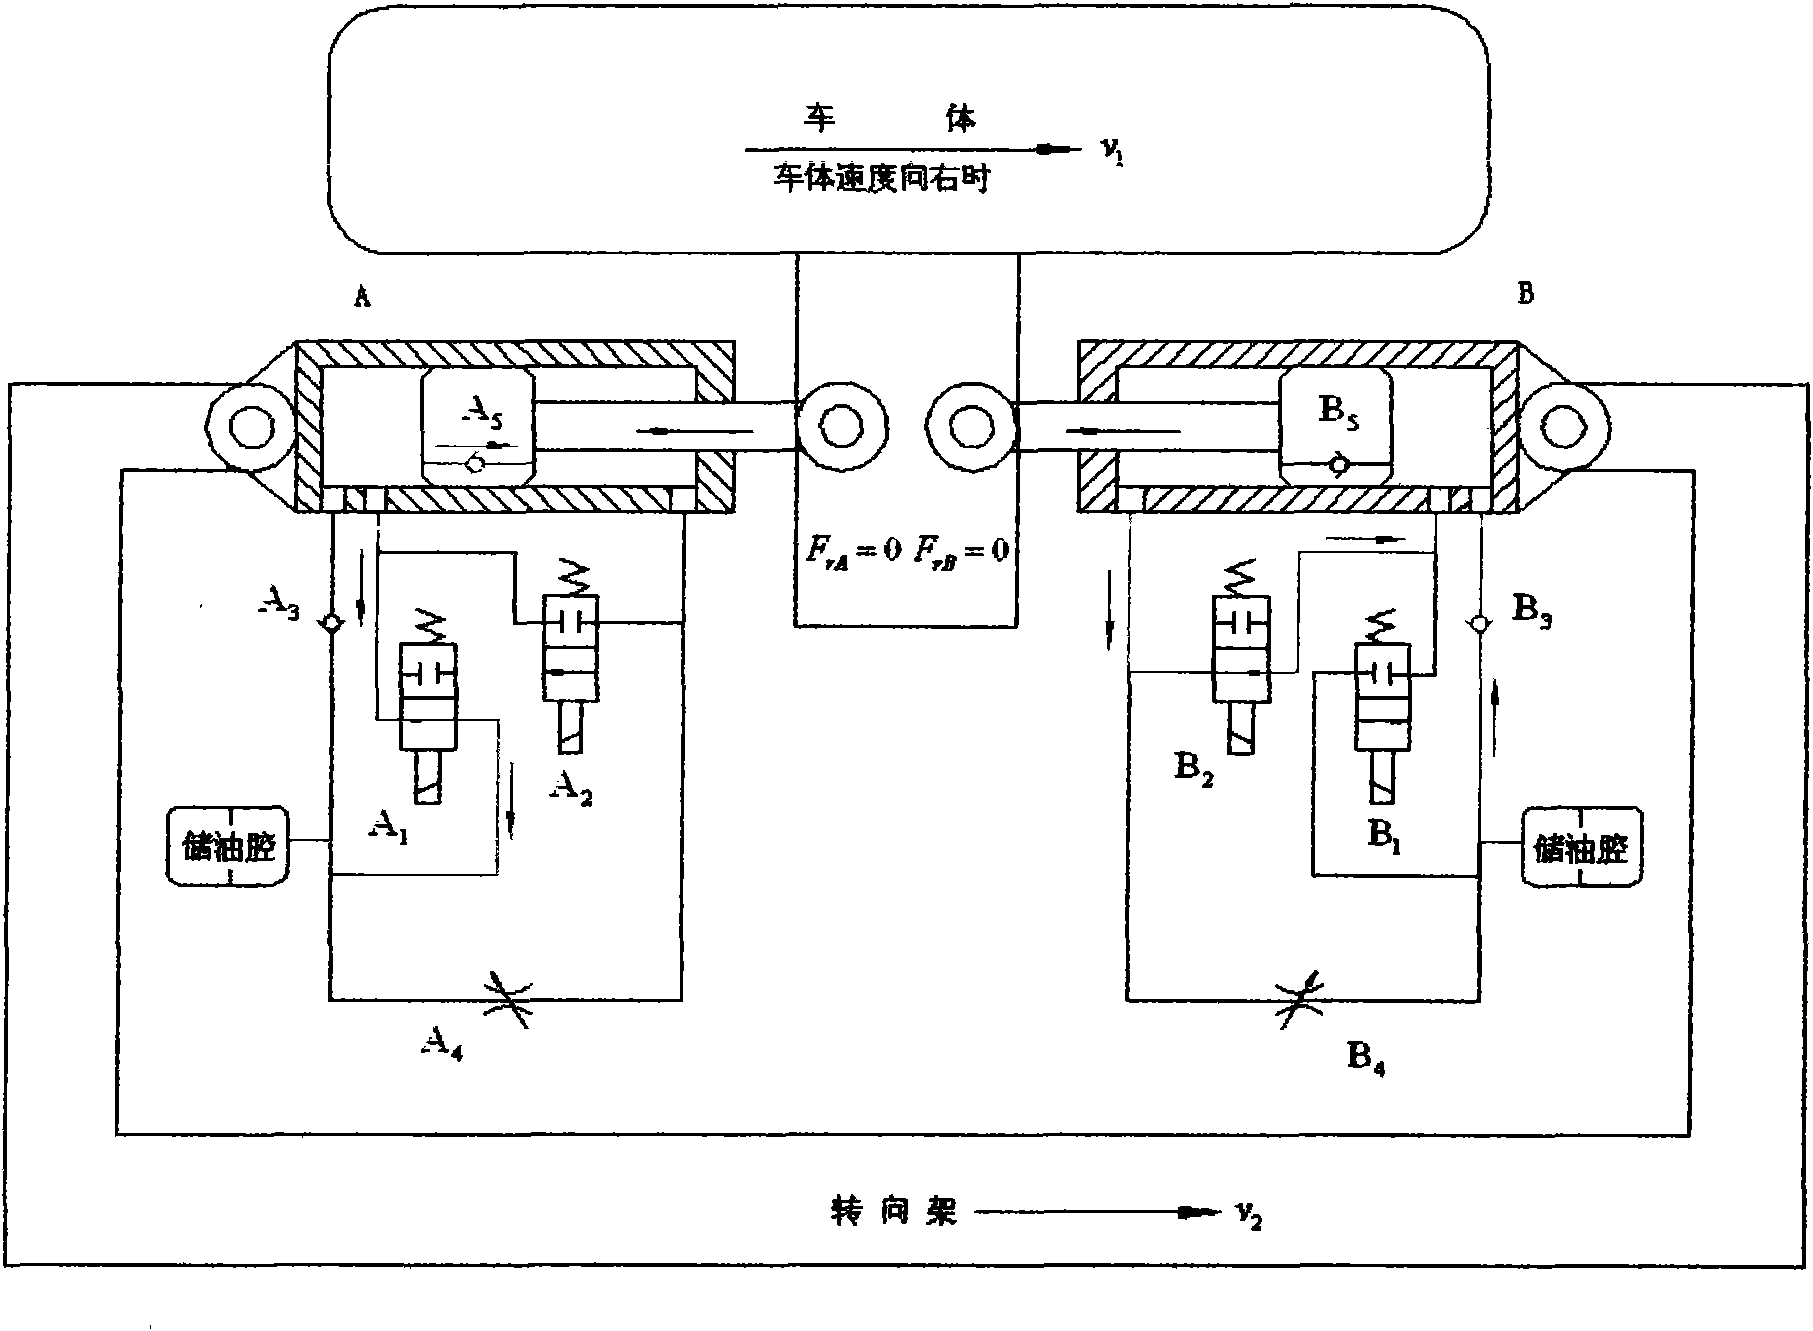 Switch type semi-active suspension system